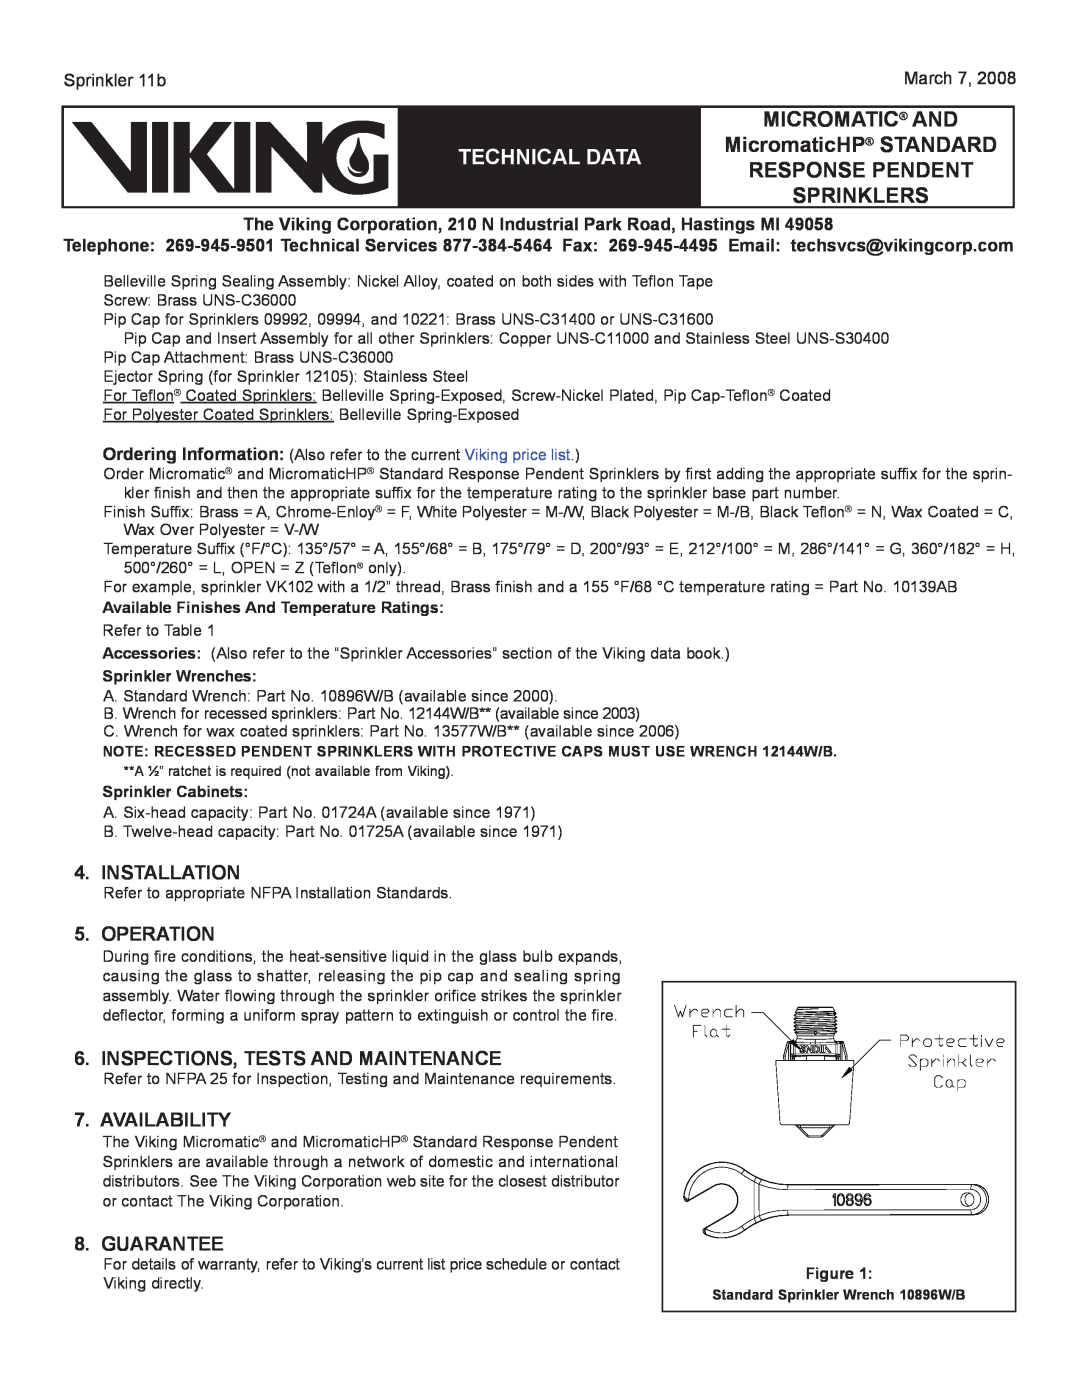 Viking Sprinkler 11a Installation, Operation, Inspections, Tests And Maintenance, Availability, Guarantee, Sprinkler 11b 